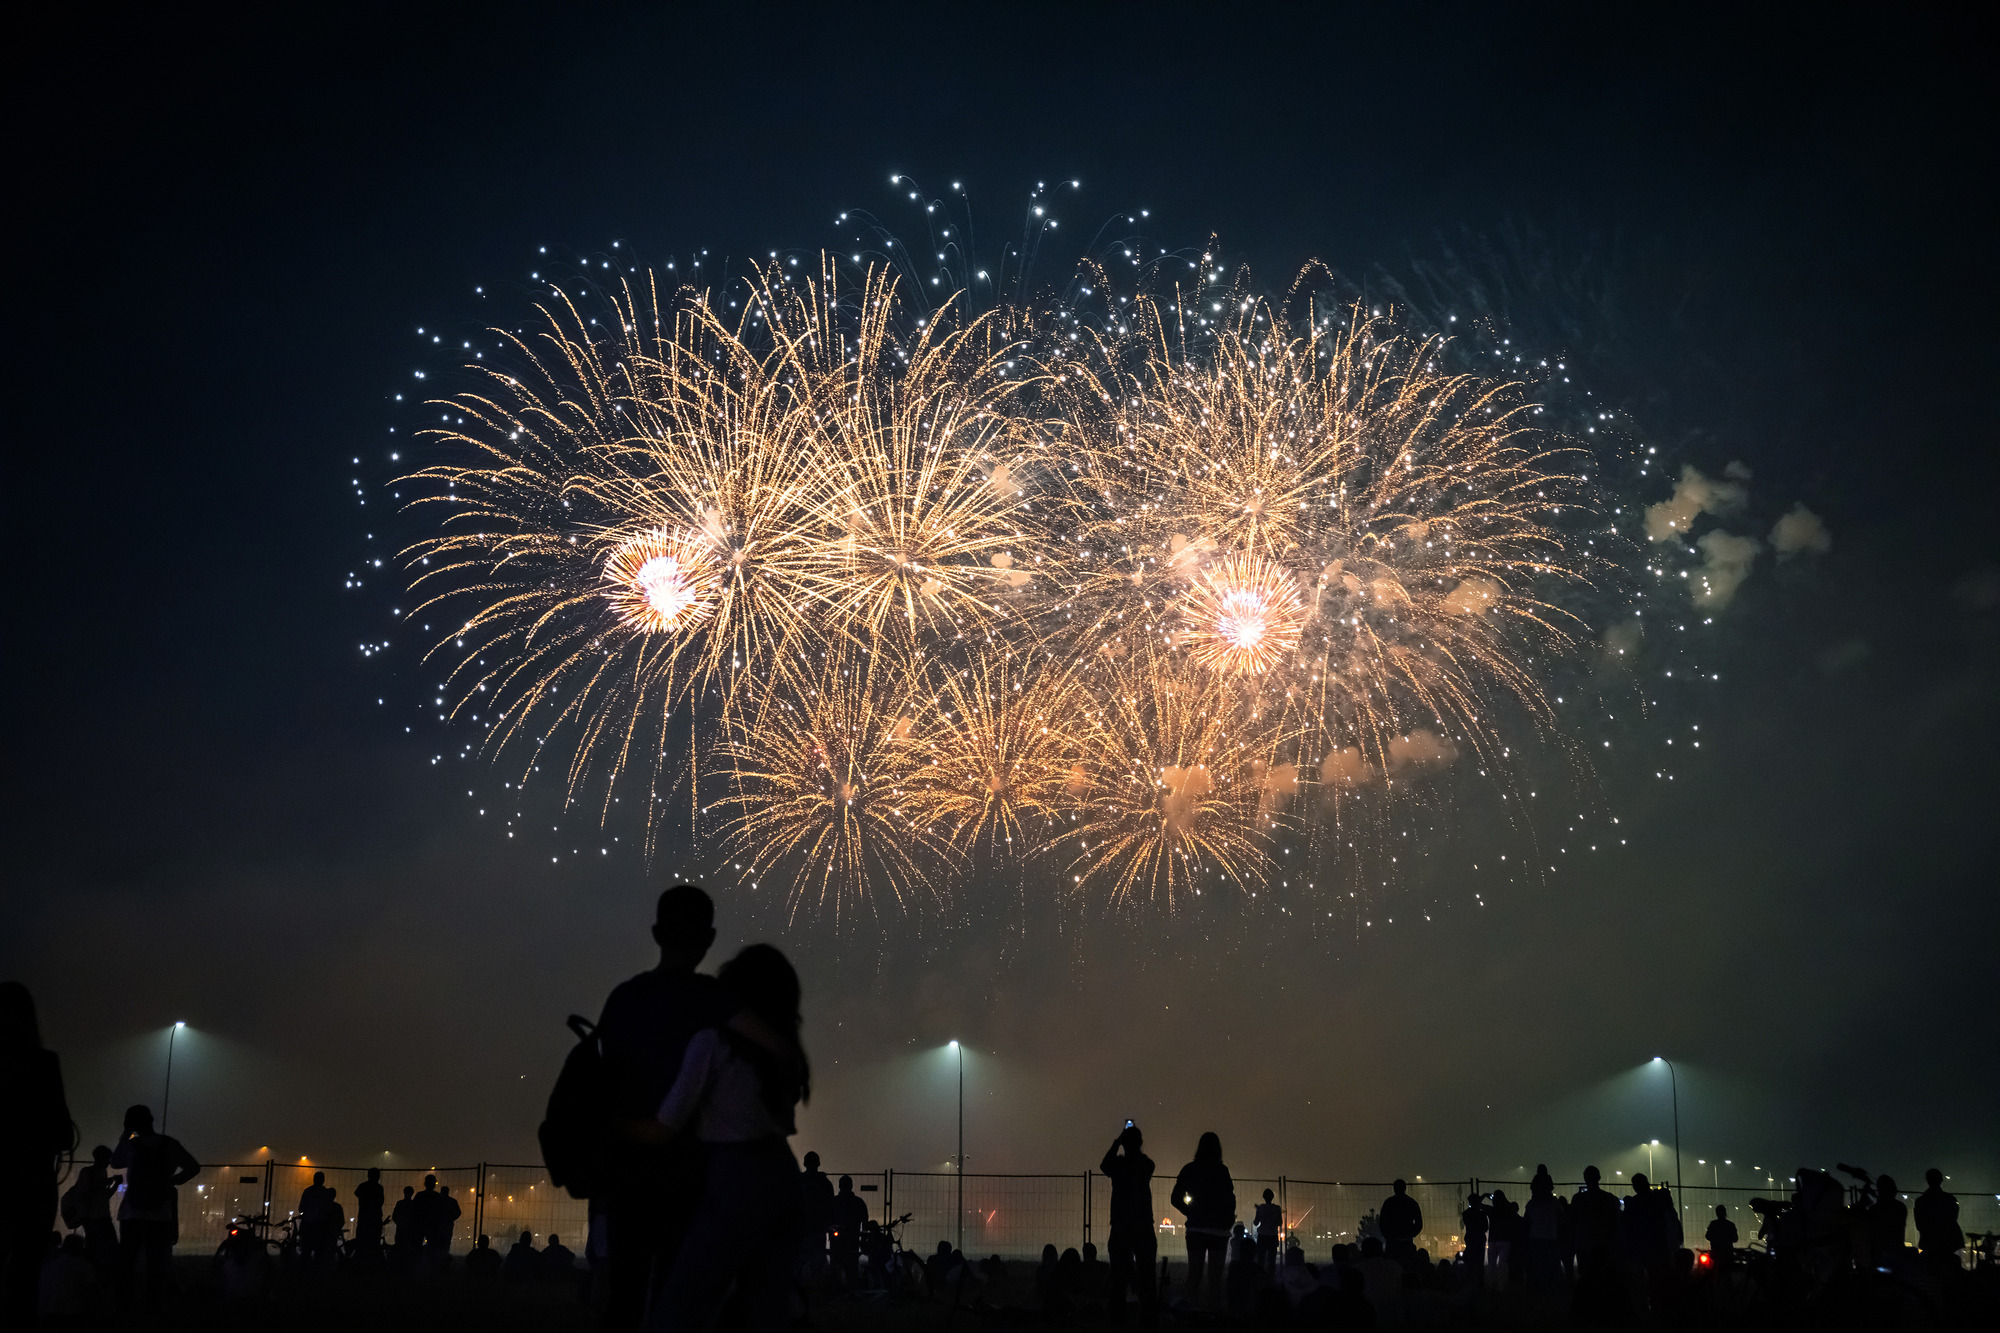 Tips for Protecting Your Eyes During 4th of July Fireworks